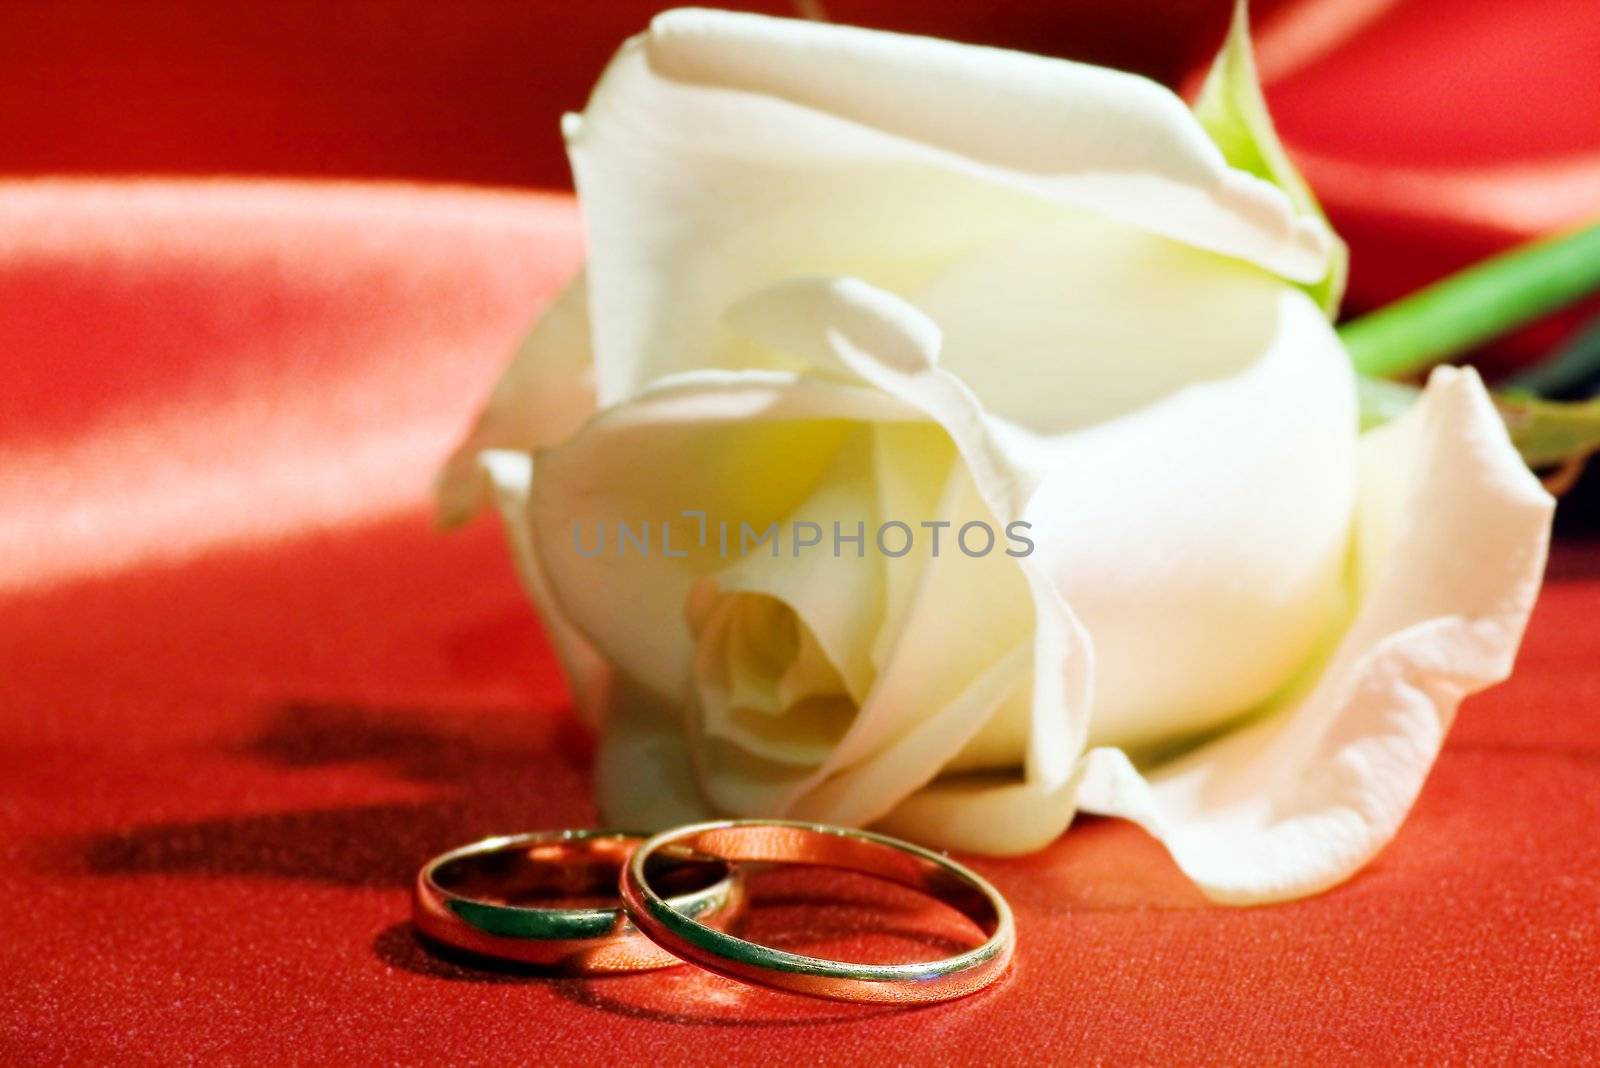 On a photo a rose and wedding rings

